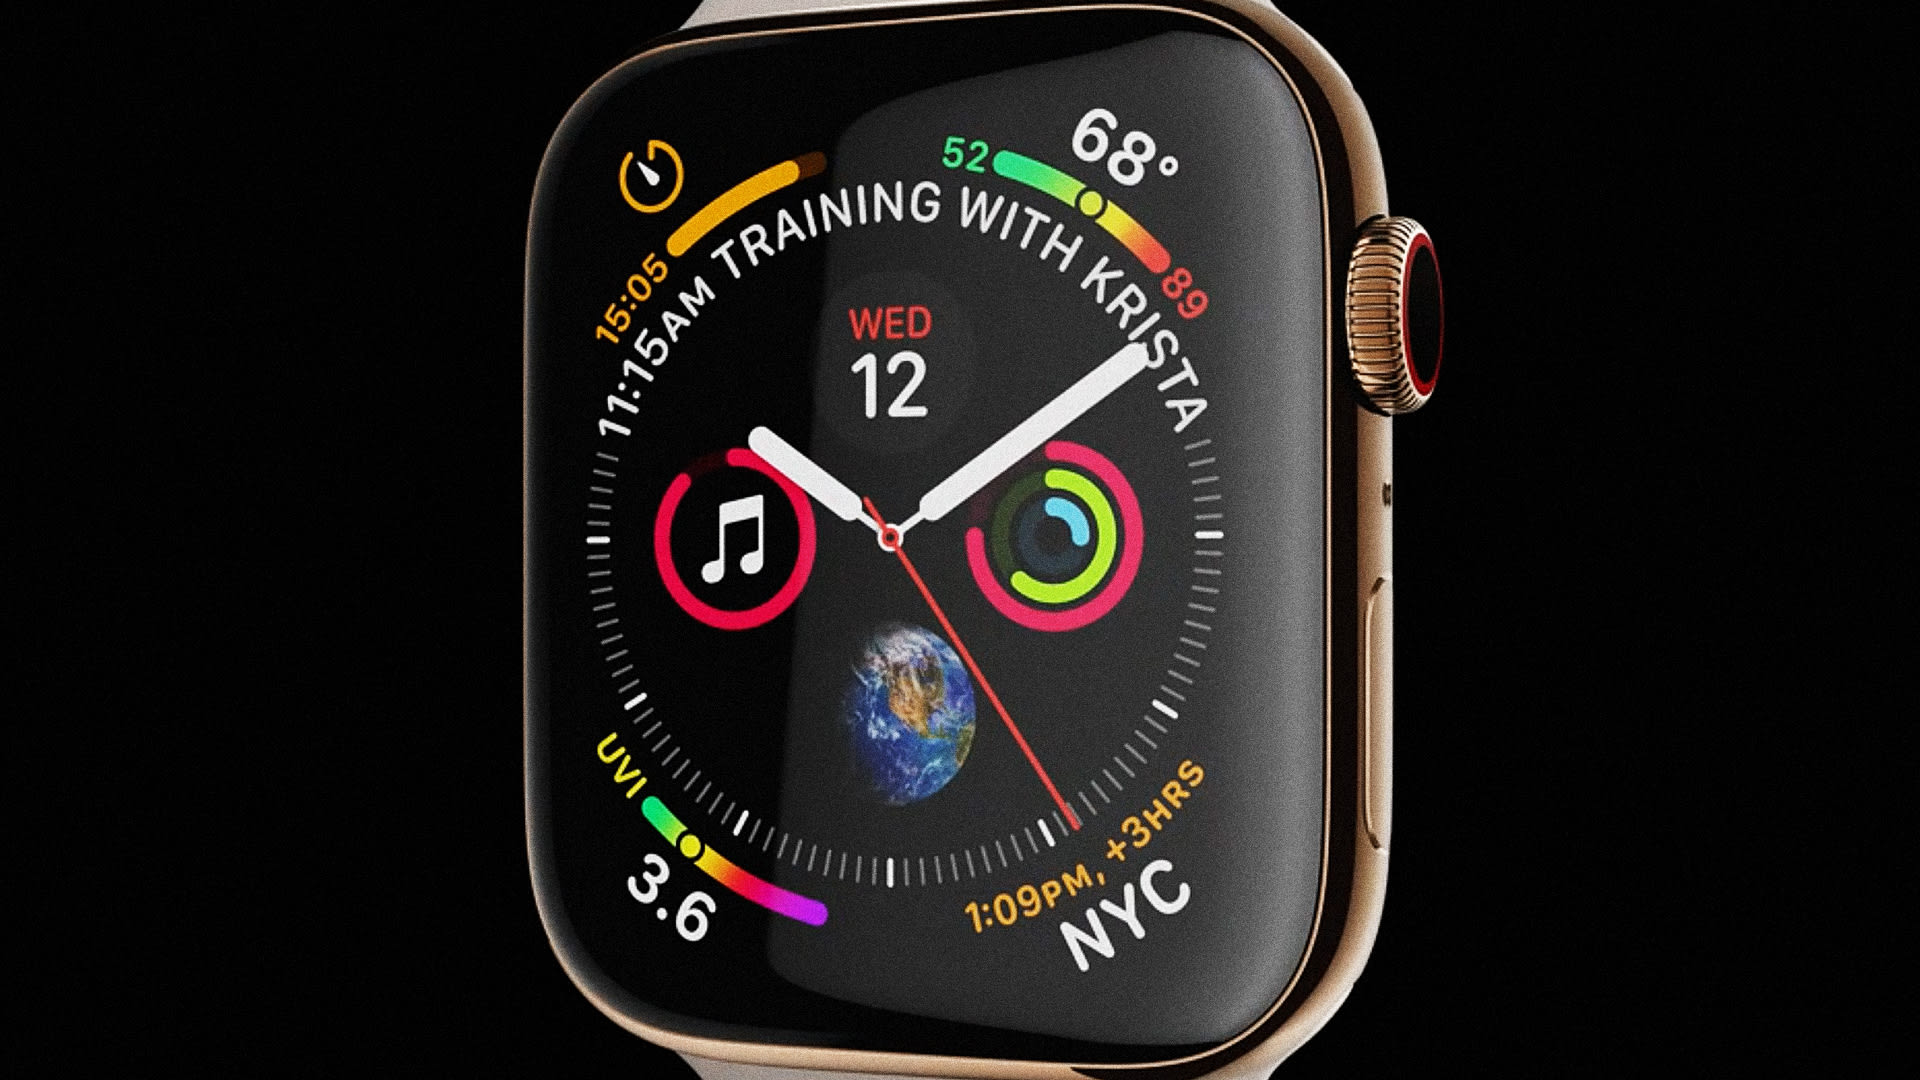 The new Apple Watch 4 face is a design crime